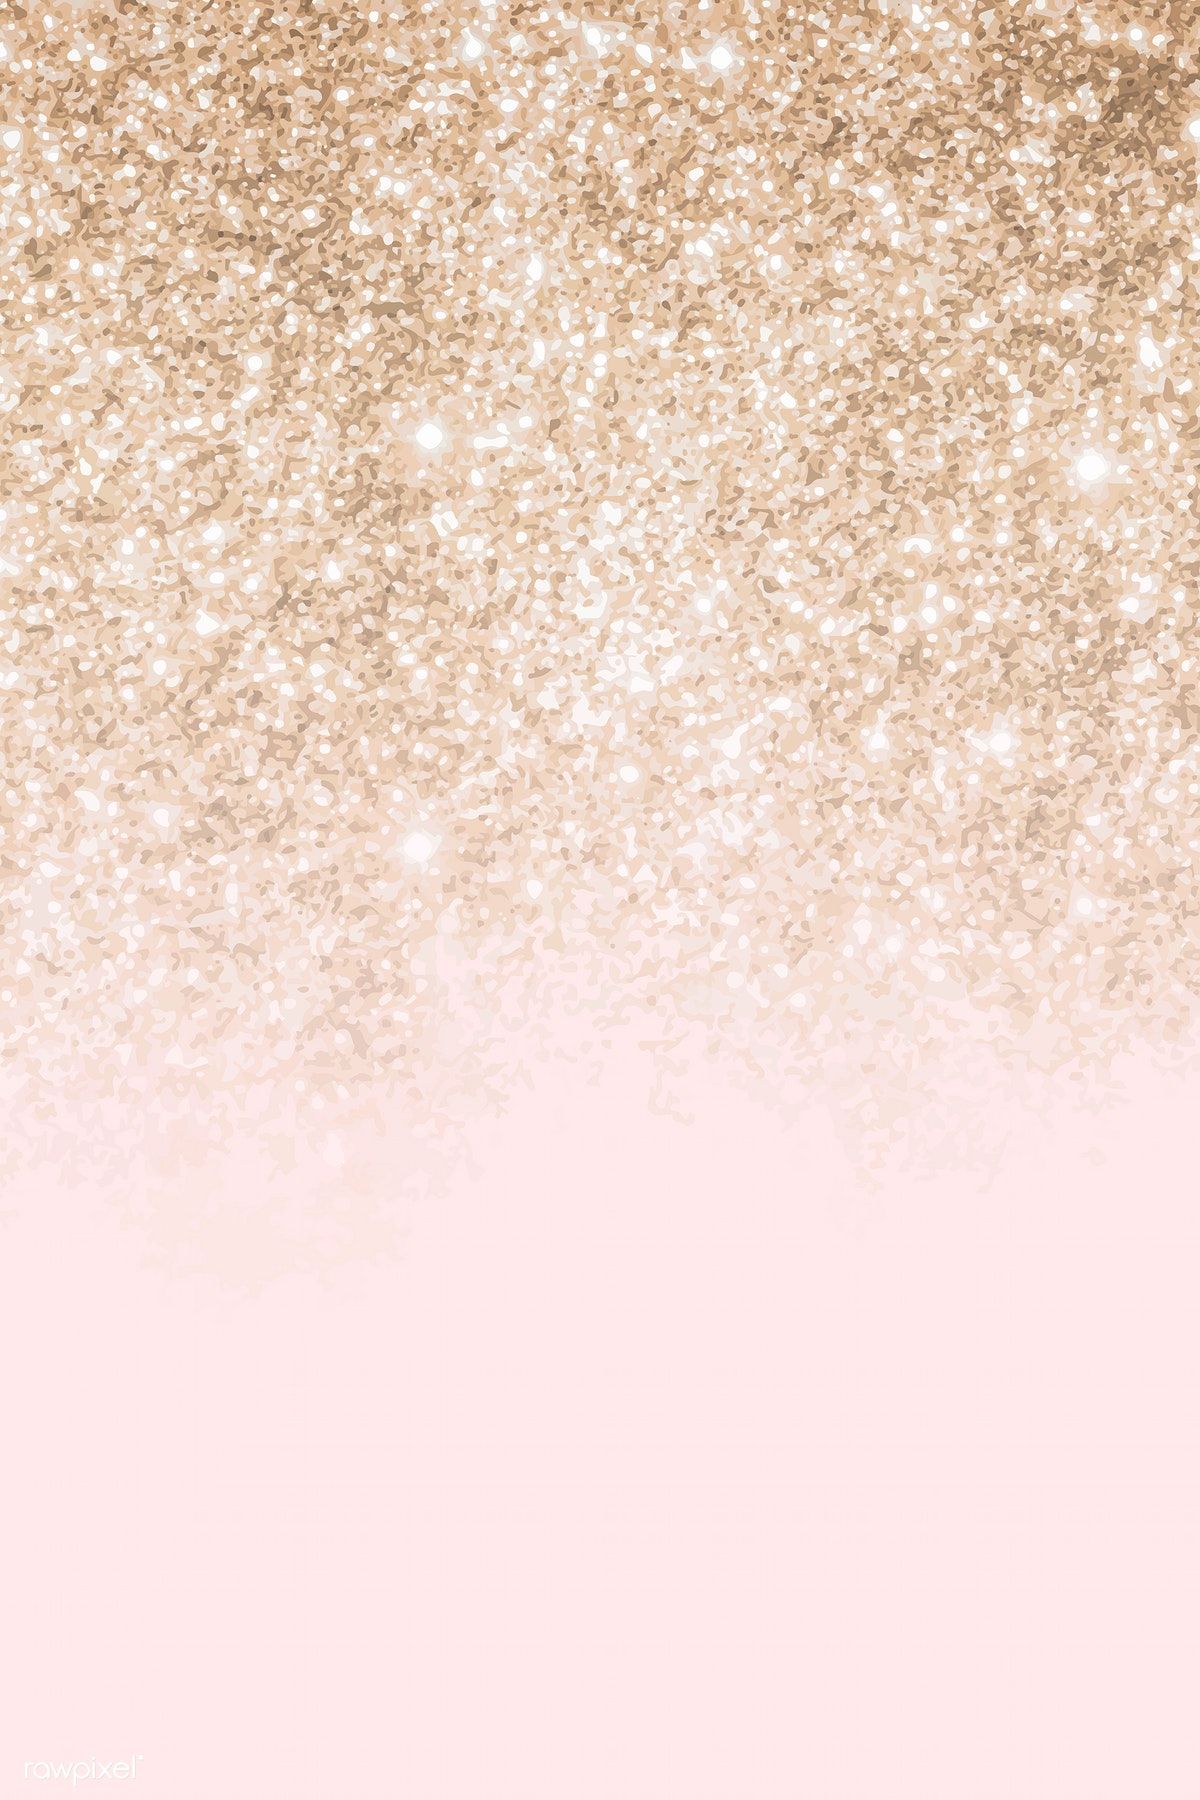 Pink and gold glittery pattern background vector / Nin. Pink and gold background, Pink glitter background, Gold glitter background